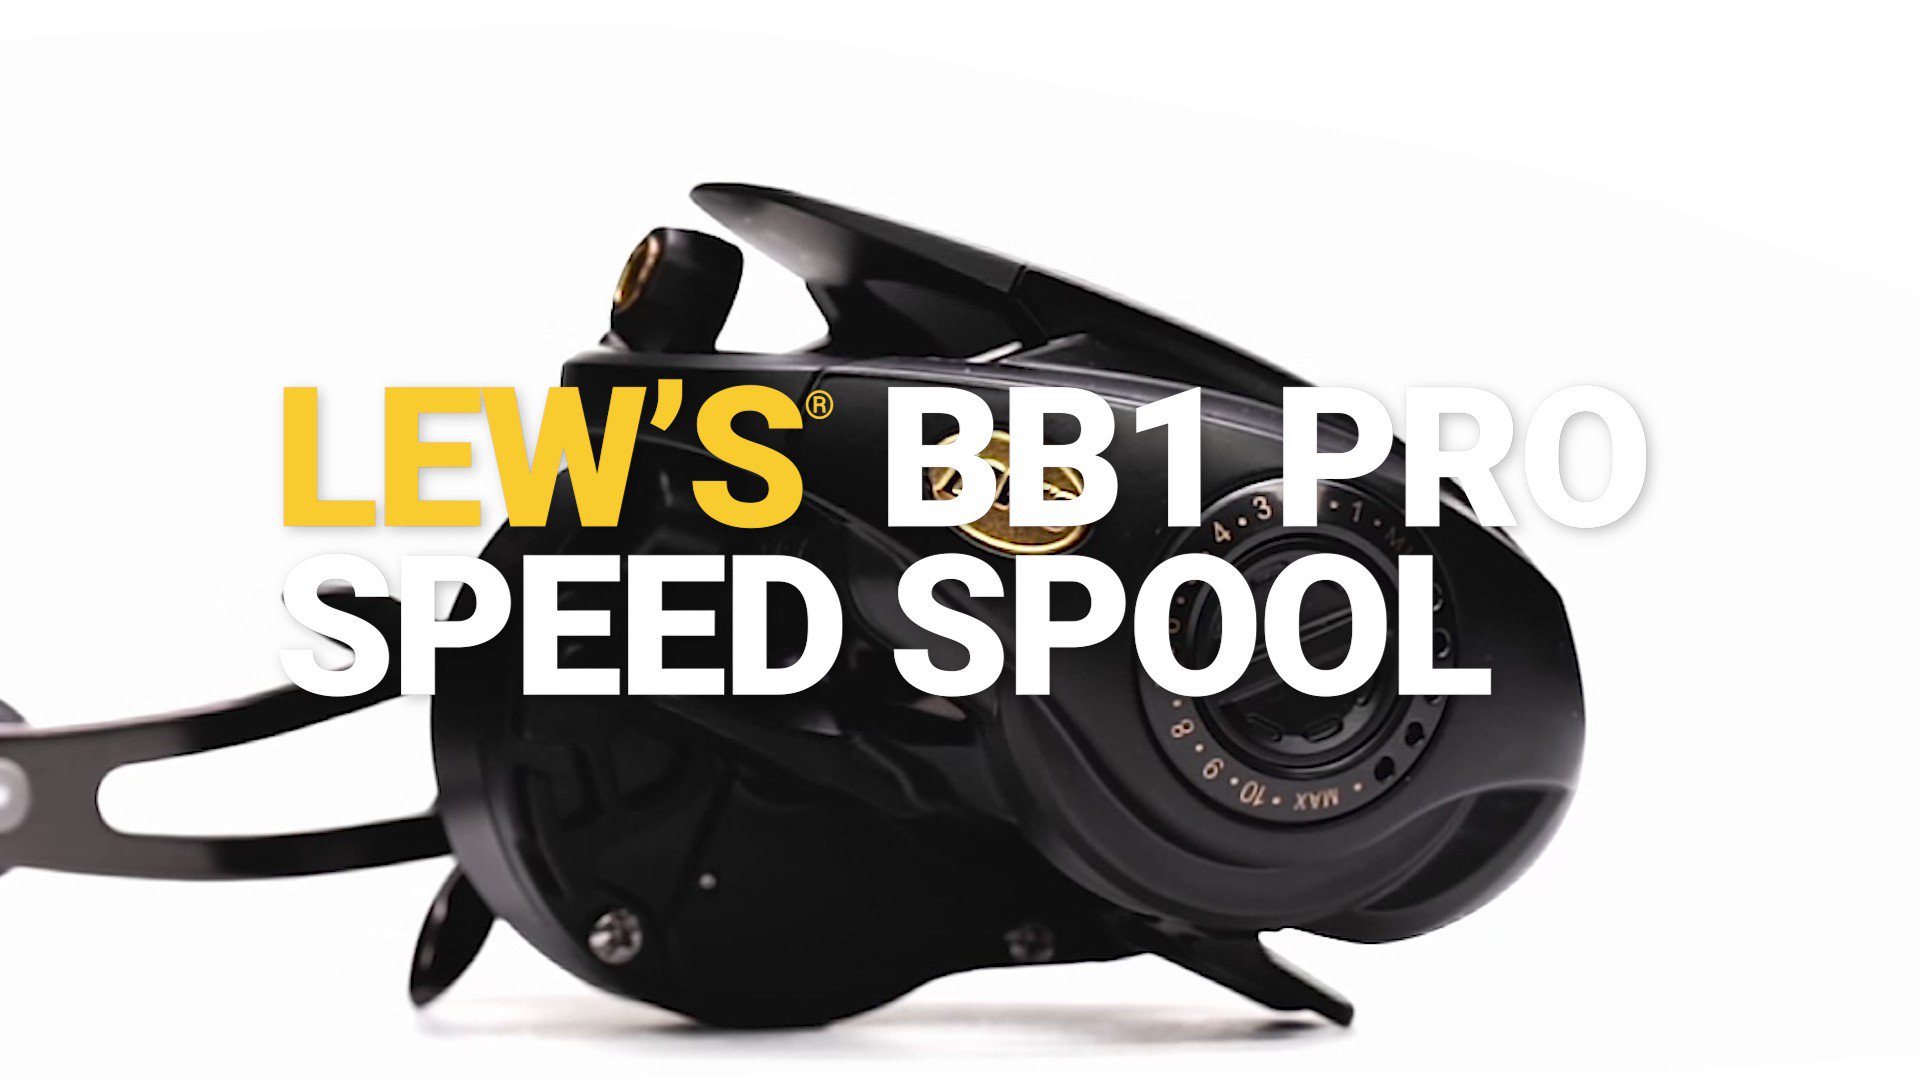 Lew's on X: Dependable. Exceptional. The newly revamped #Lews BB1 Pro  Baitcast Reel is built for long hours on the water under tough fishing  conditions, when comfort and ease of use are